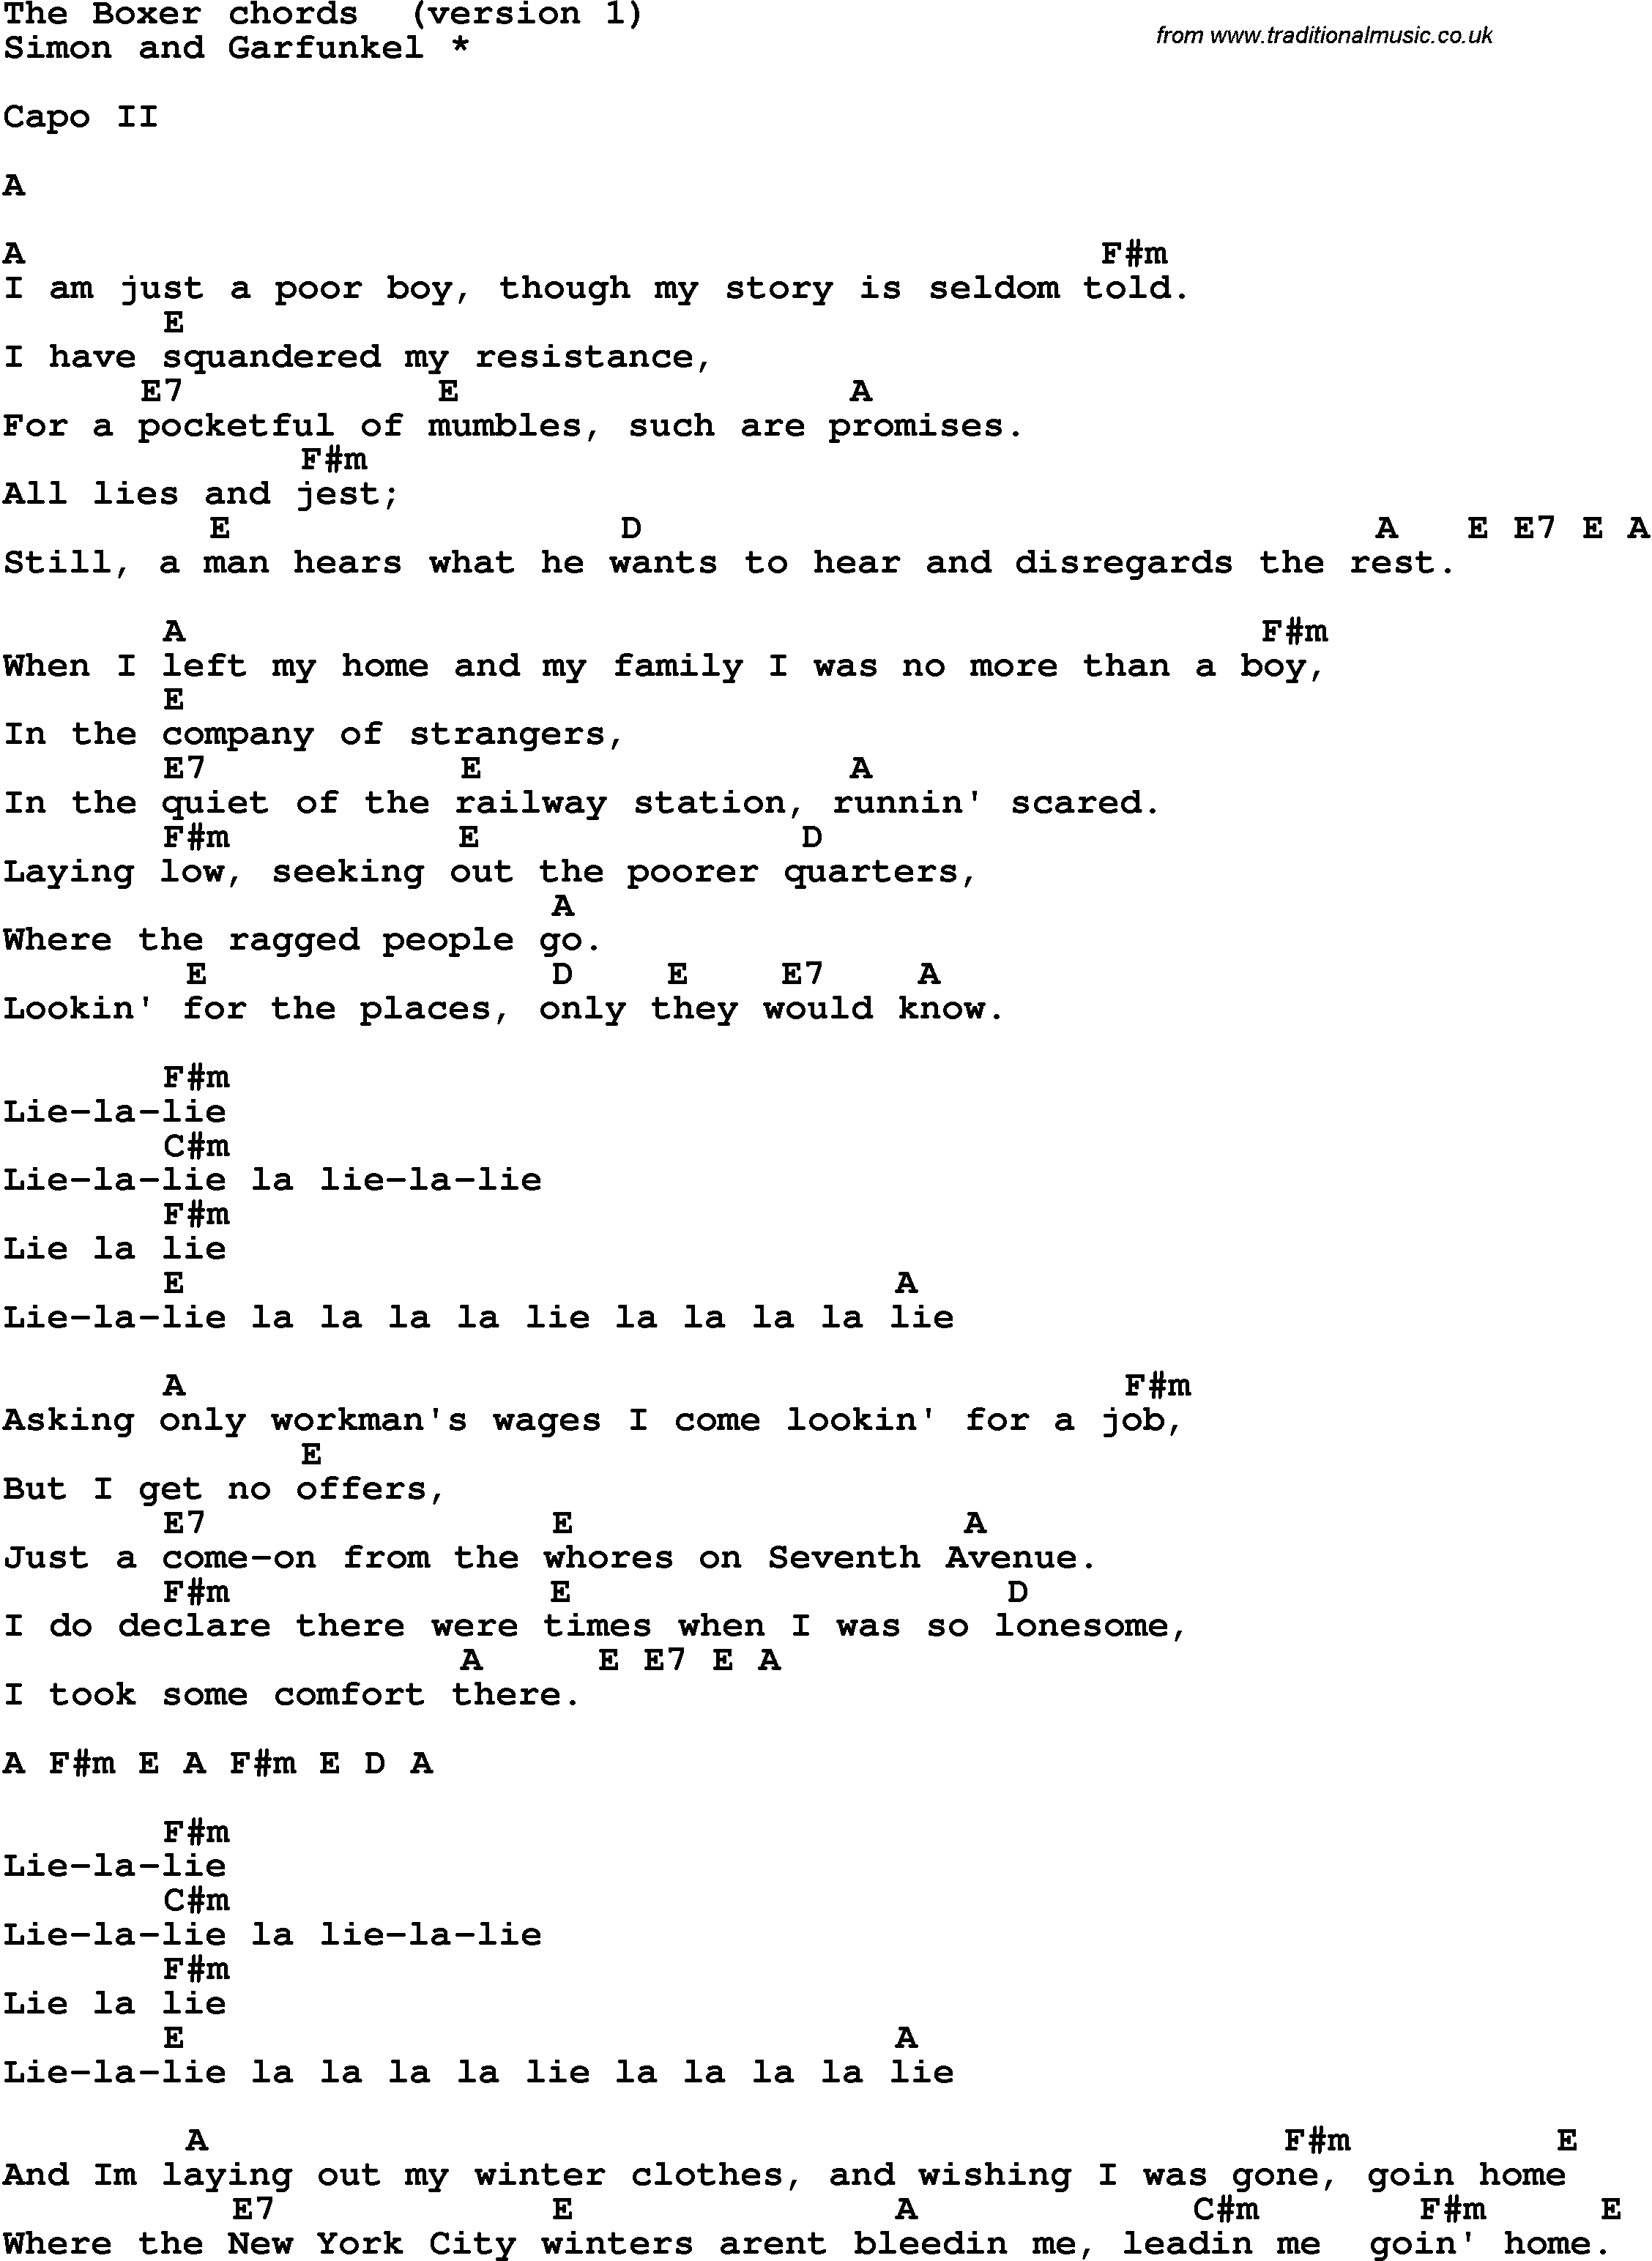 The Boxer Chords Song Lyrics With Guitar Chords For The Boxer Simon And Garfunkel